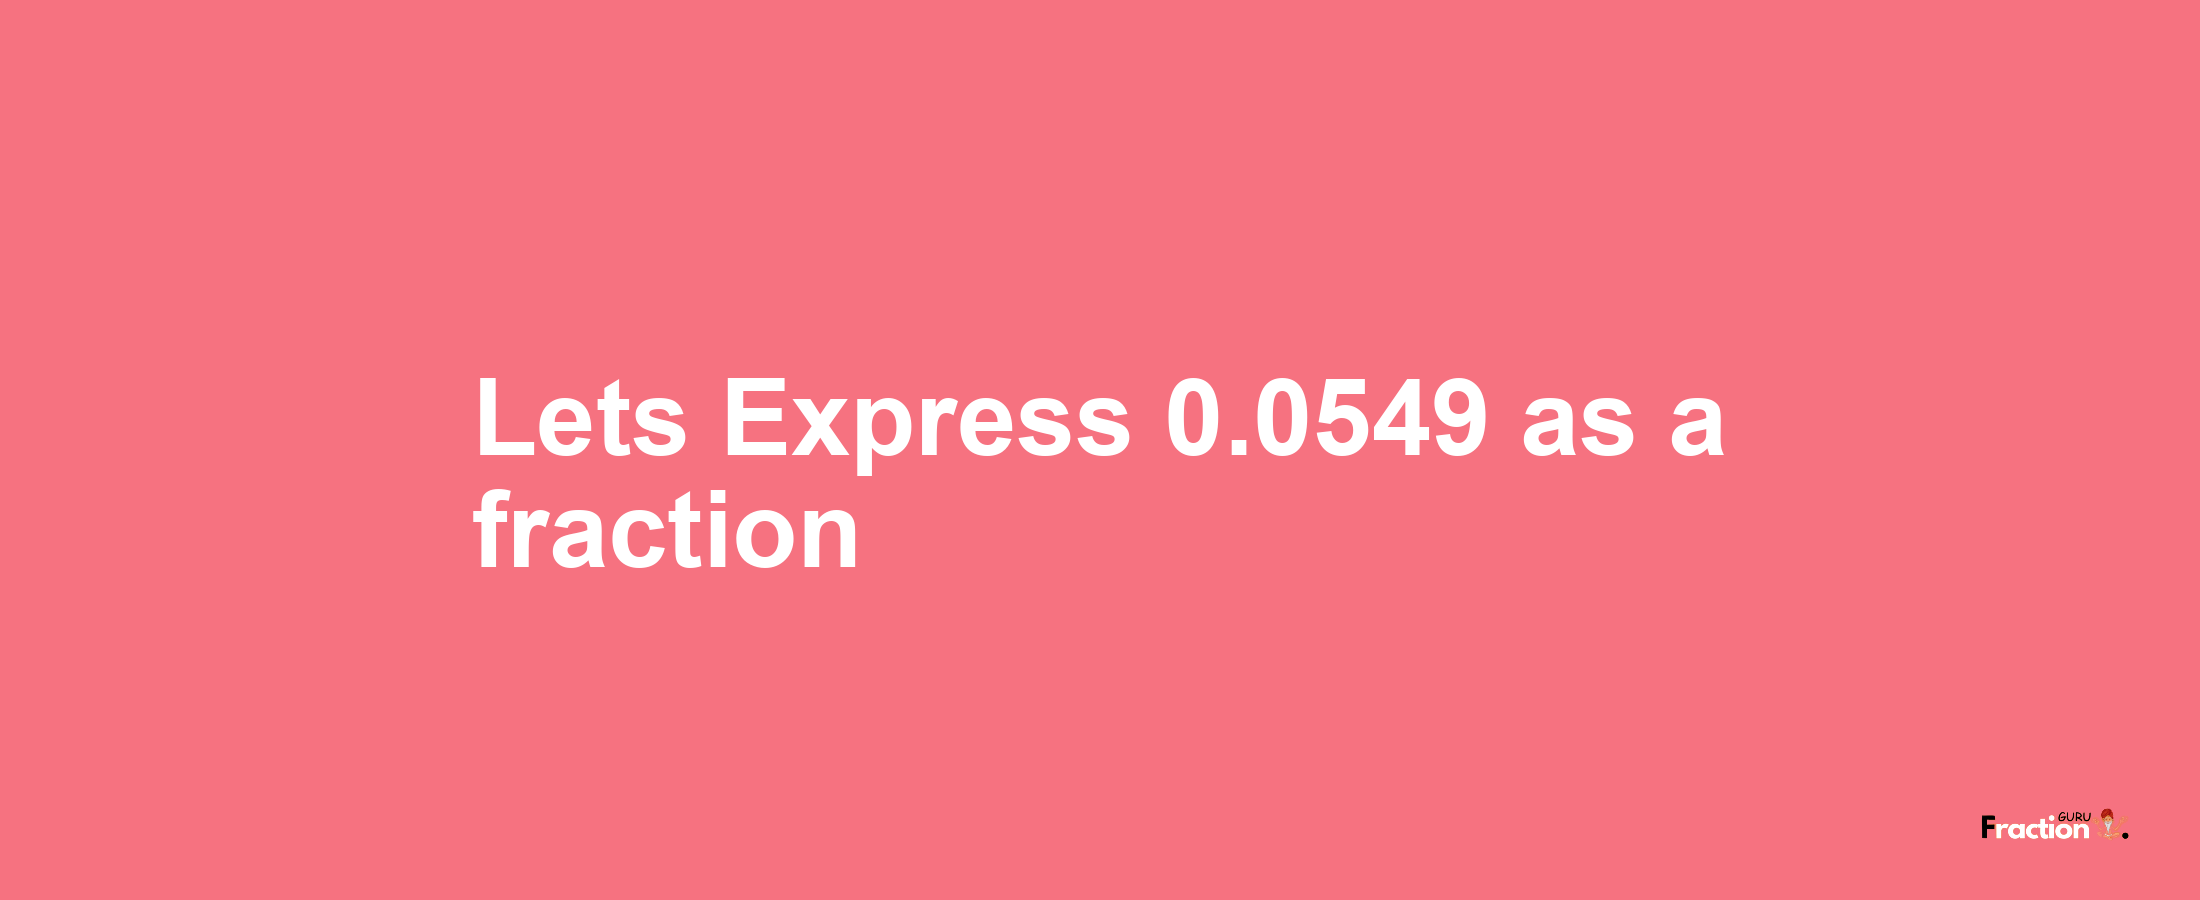 Lets Express 0.0549 as afraction